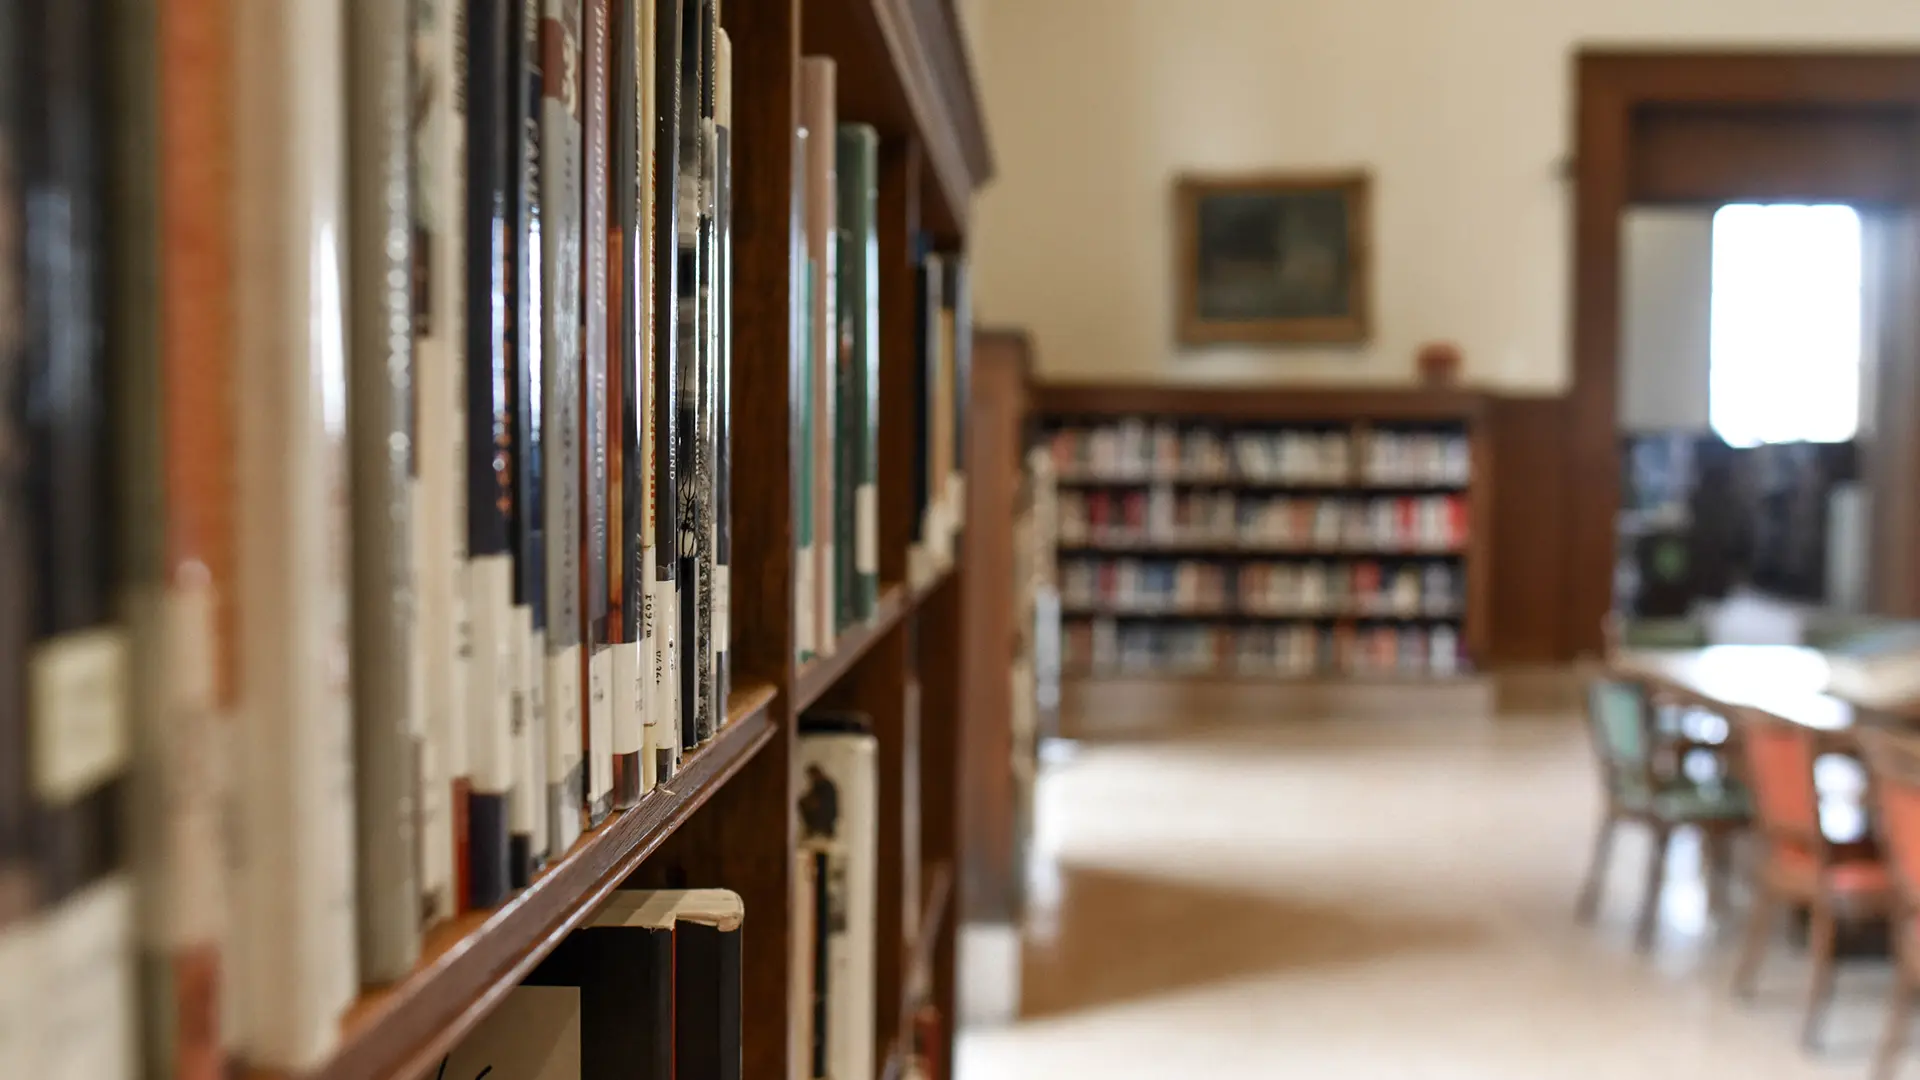 Image of inside of a library with books going out of focus and another bookshelf behind it